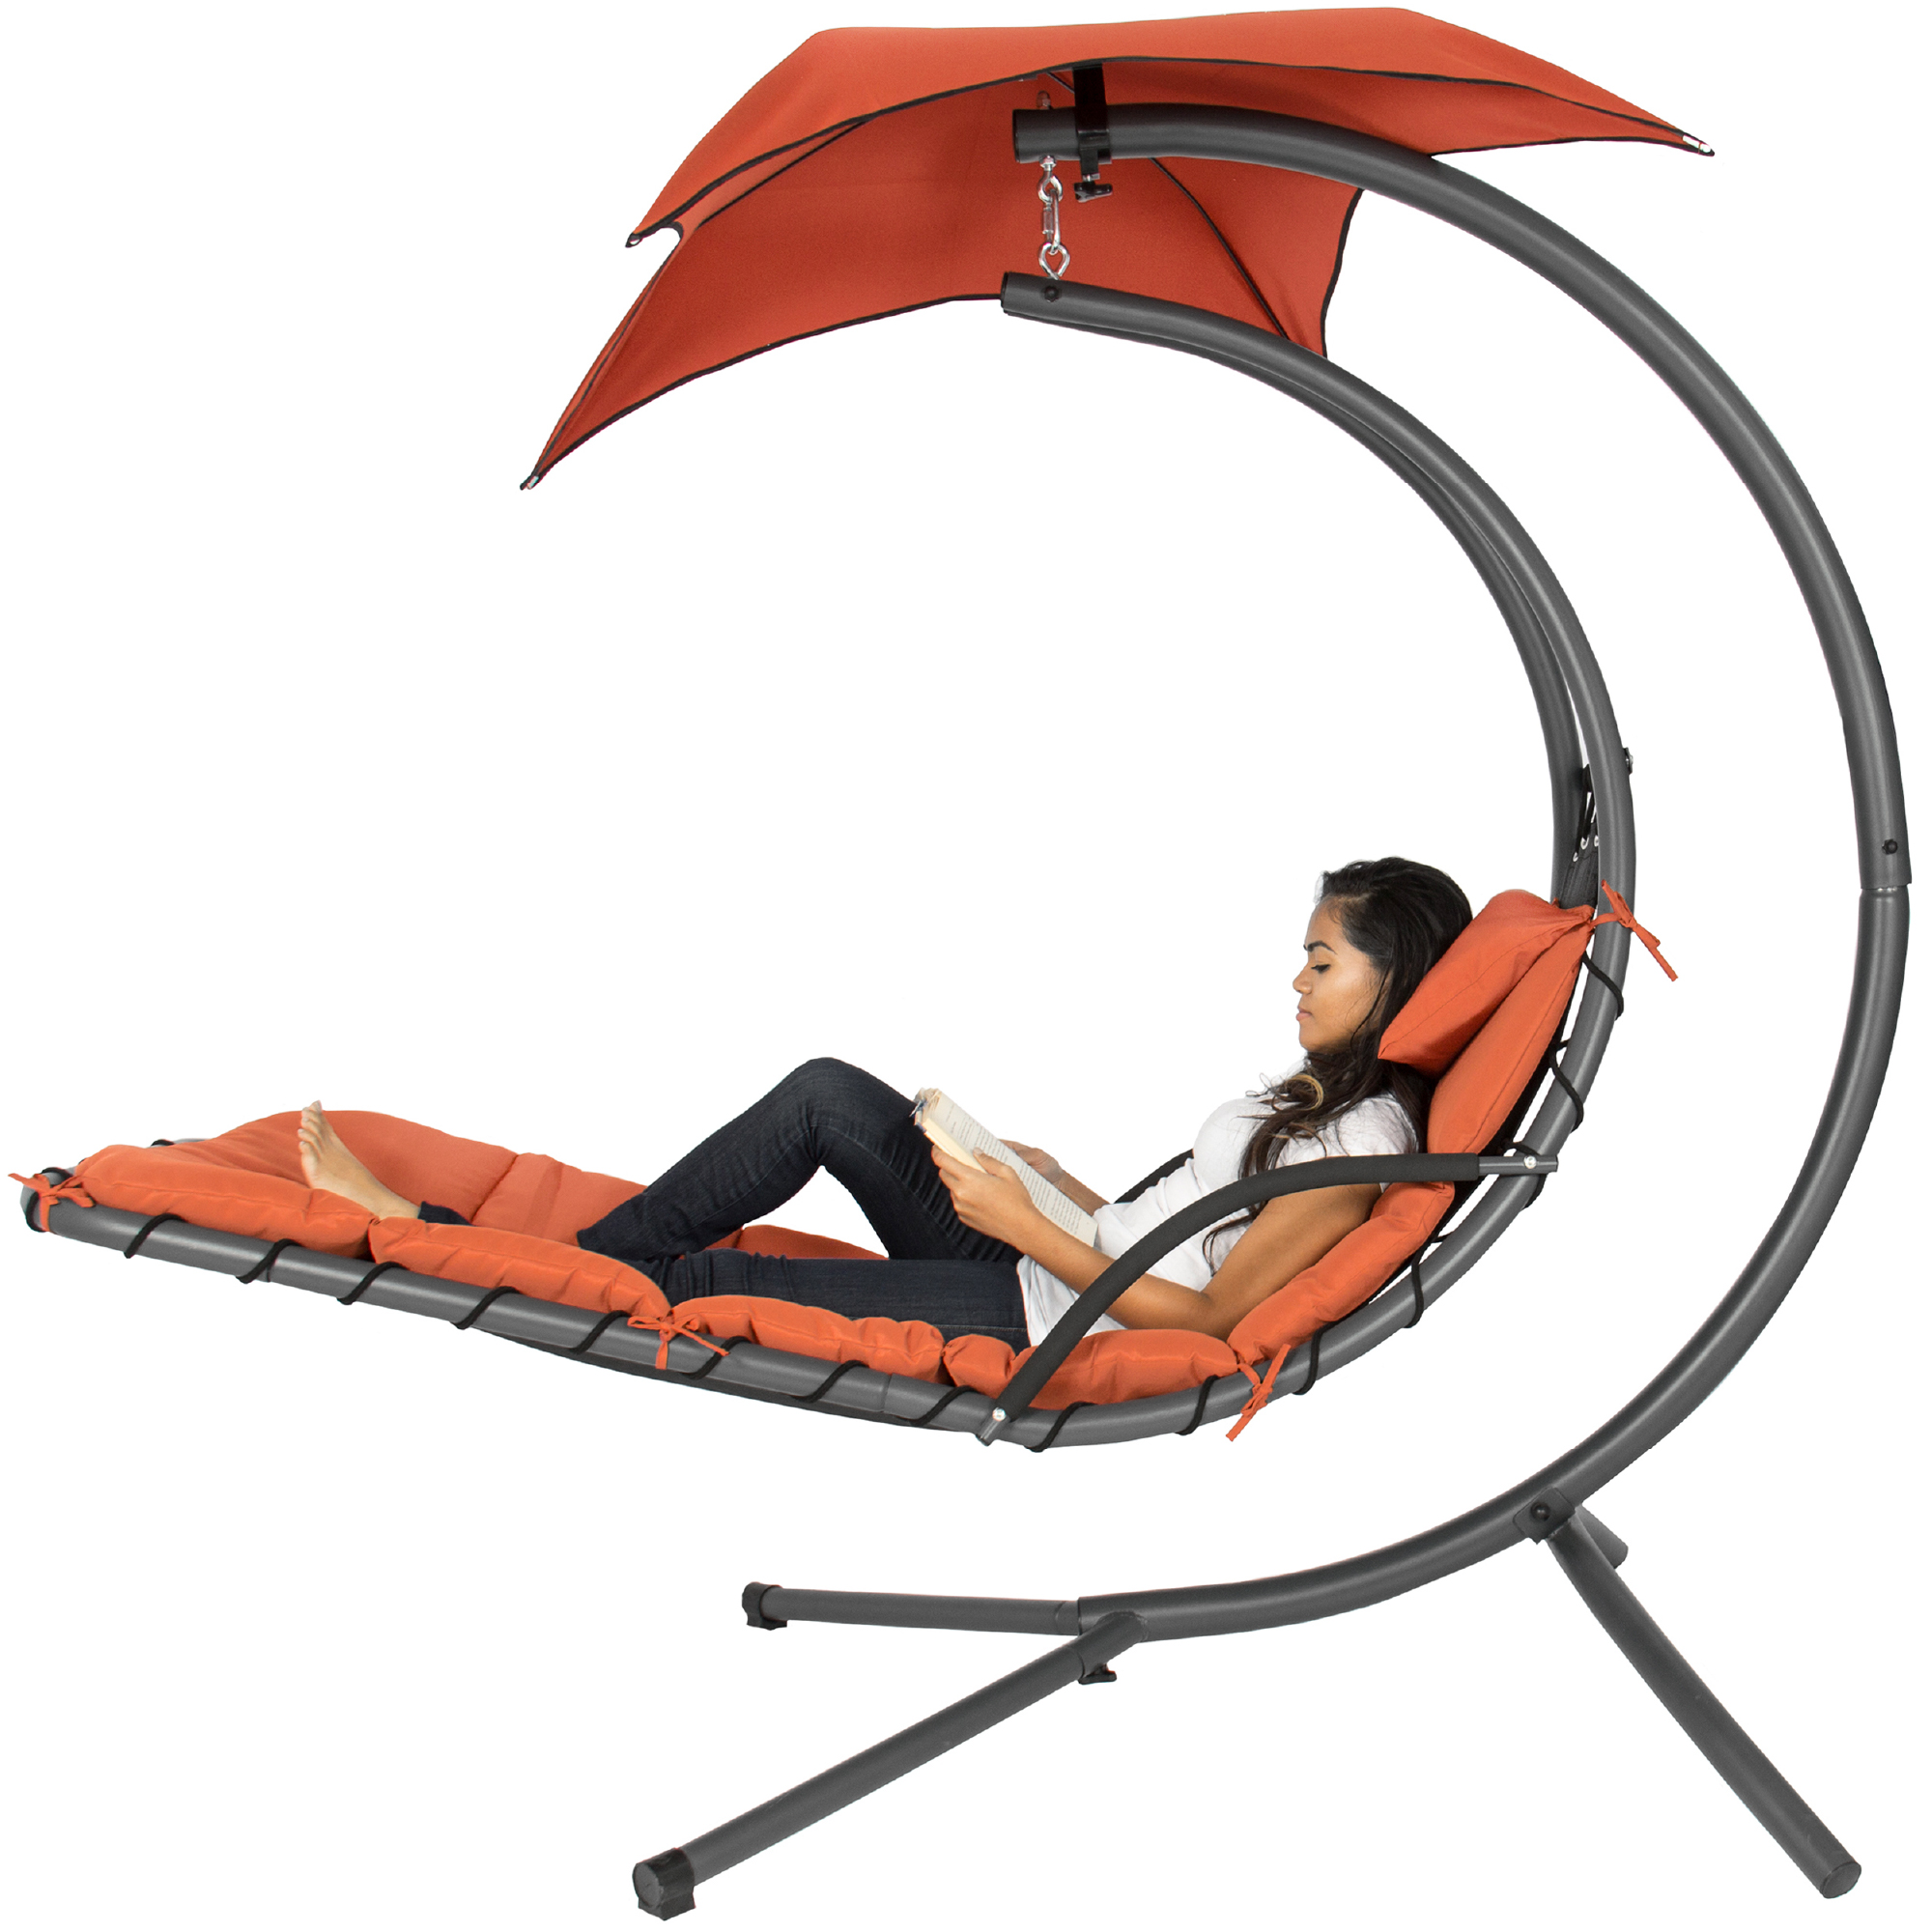 Best Choice Products Hanging Curved Chaise Lounge Chair Swing for Backyard, Patio w/ Pillow, Shade, Stand - Orange - image 1 of 8